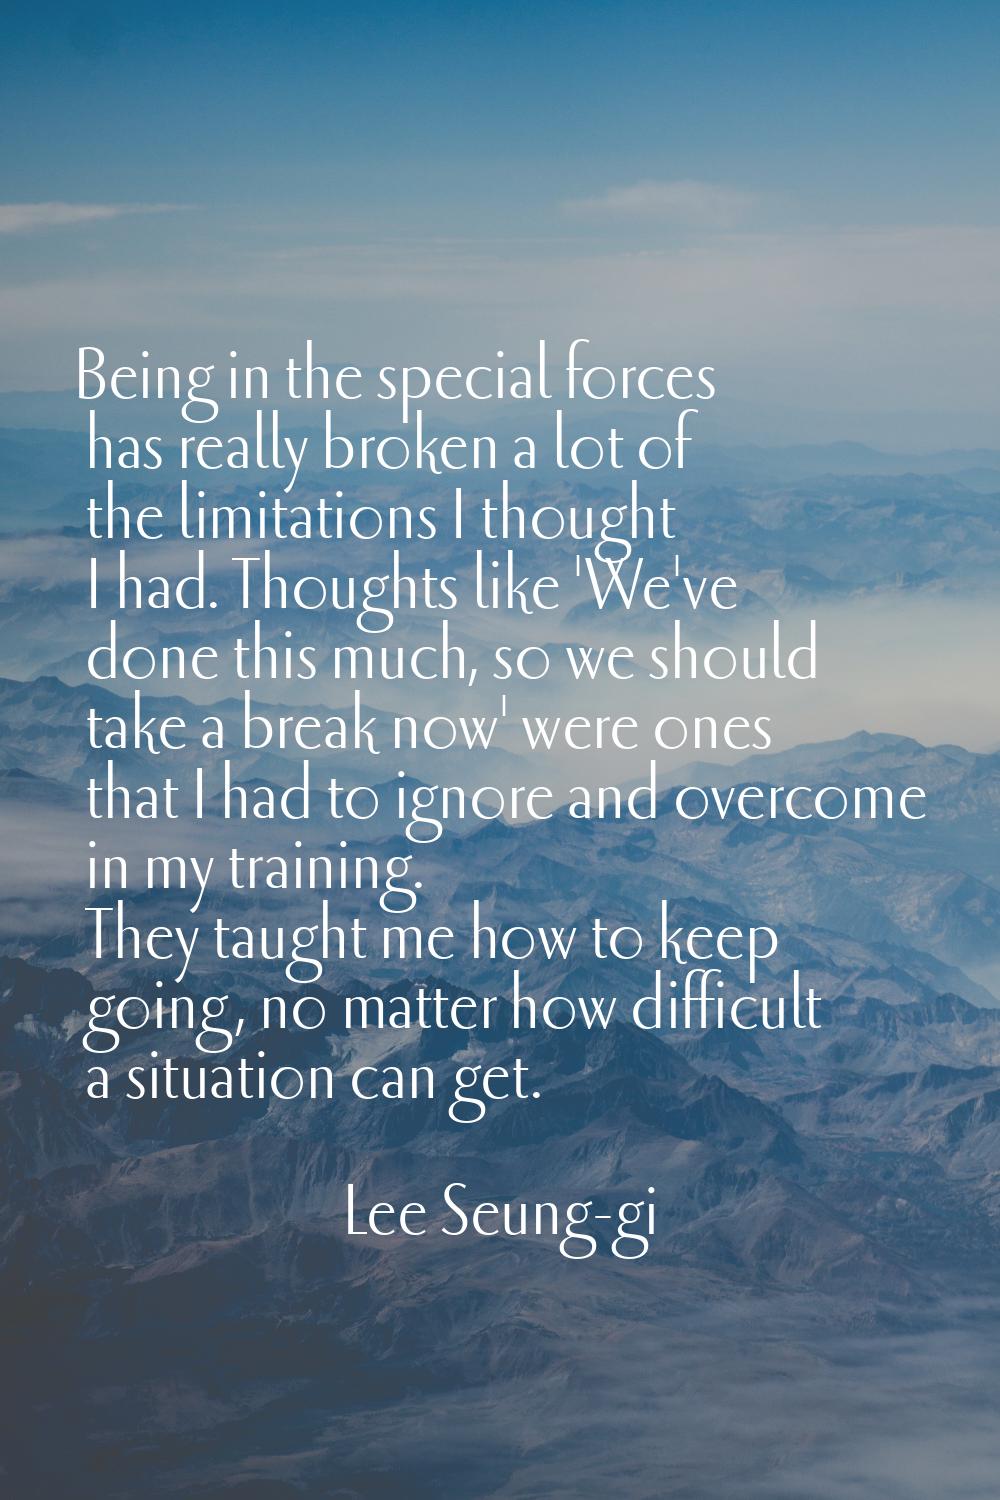 Being in the special forces has really broken a lot of the limitations I thought I had. Thoughts li